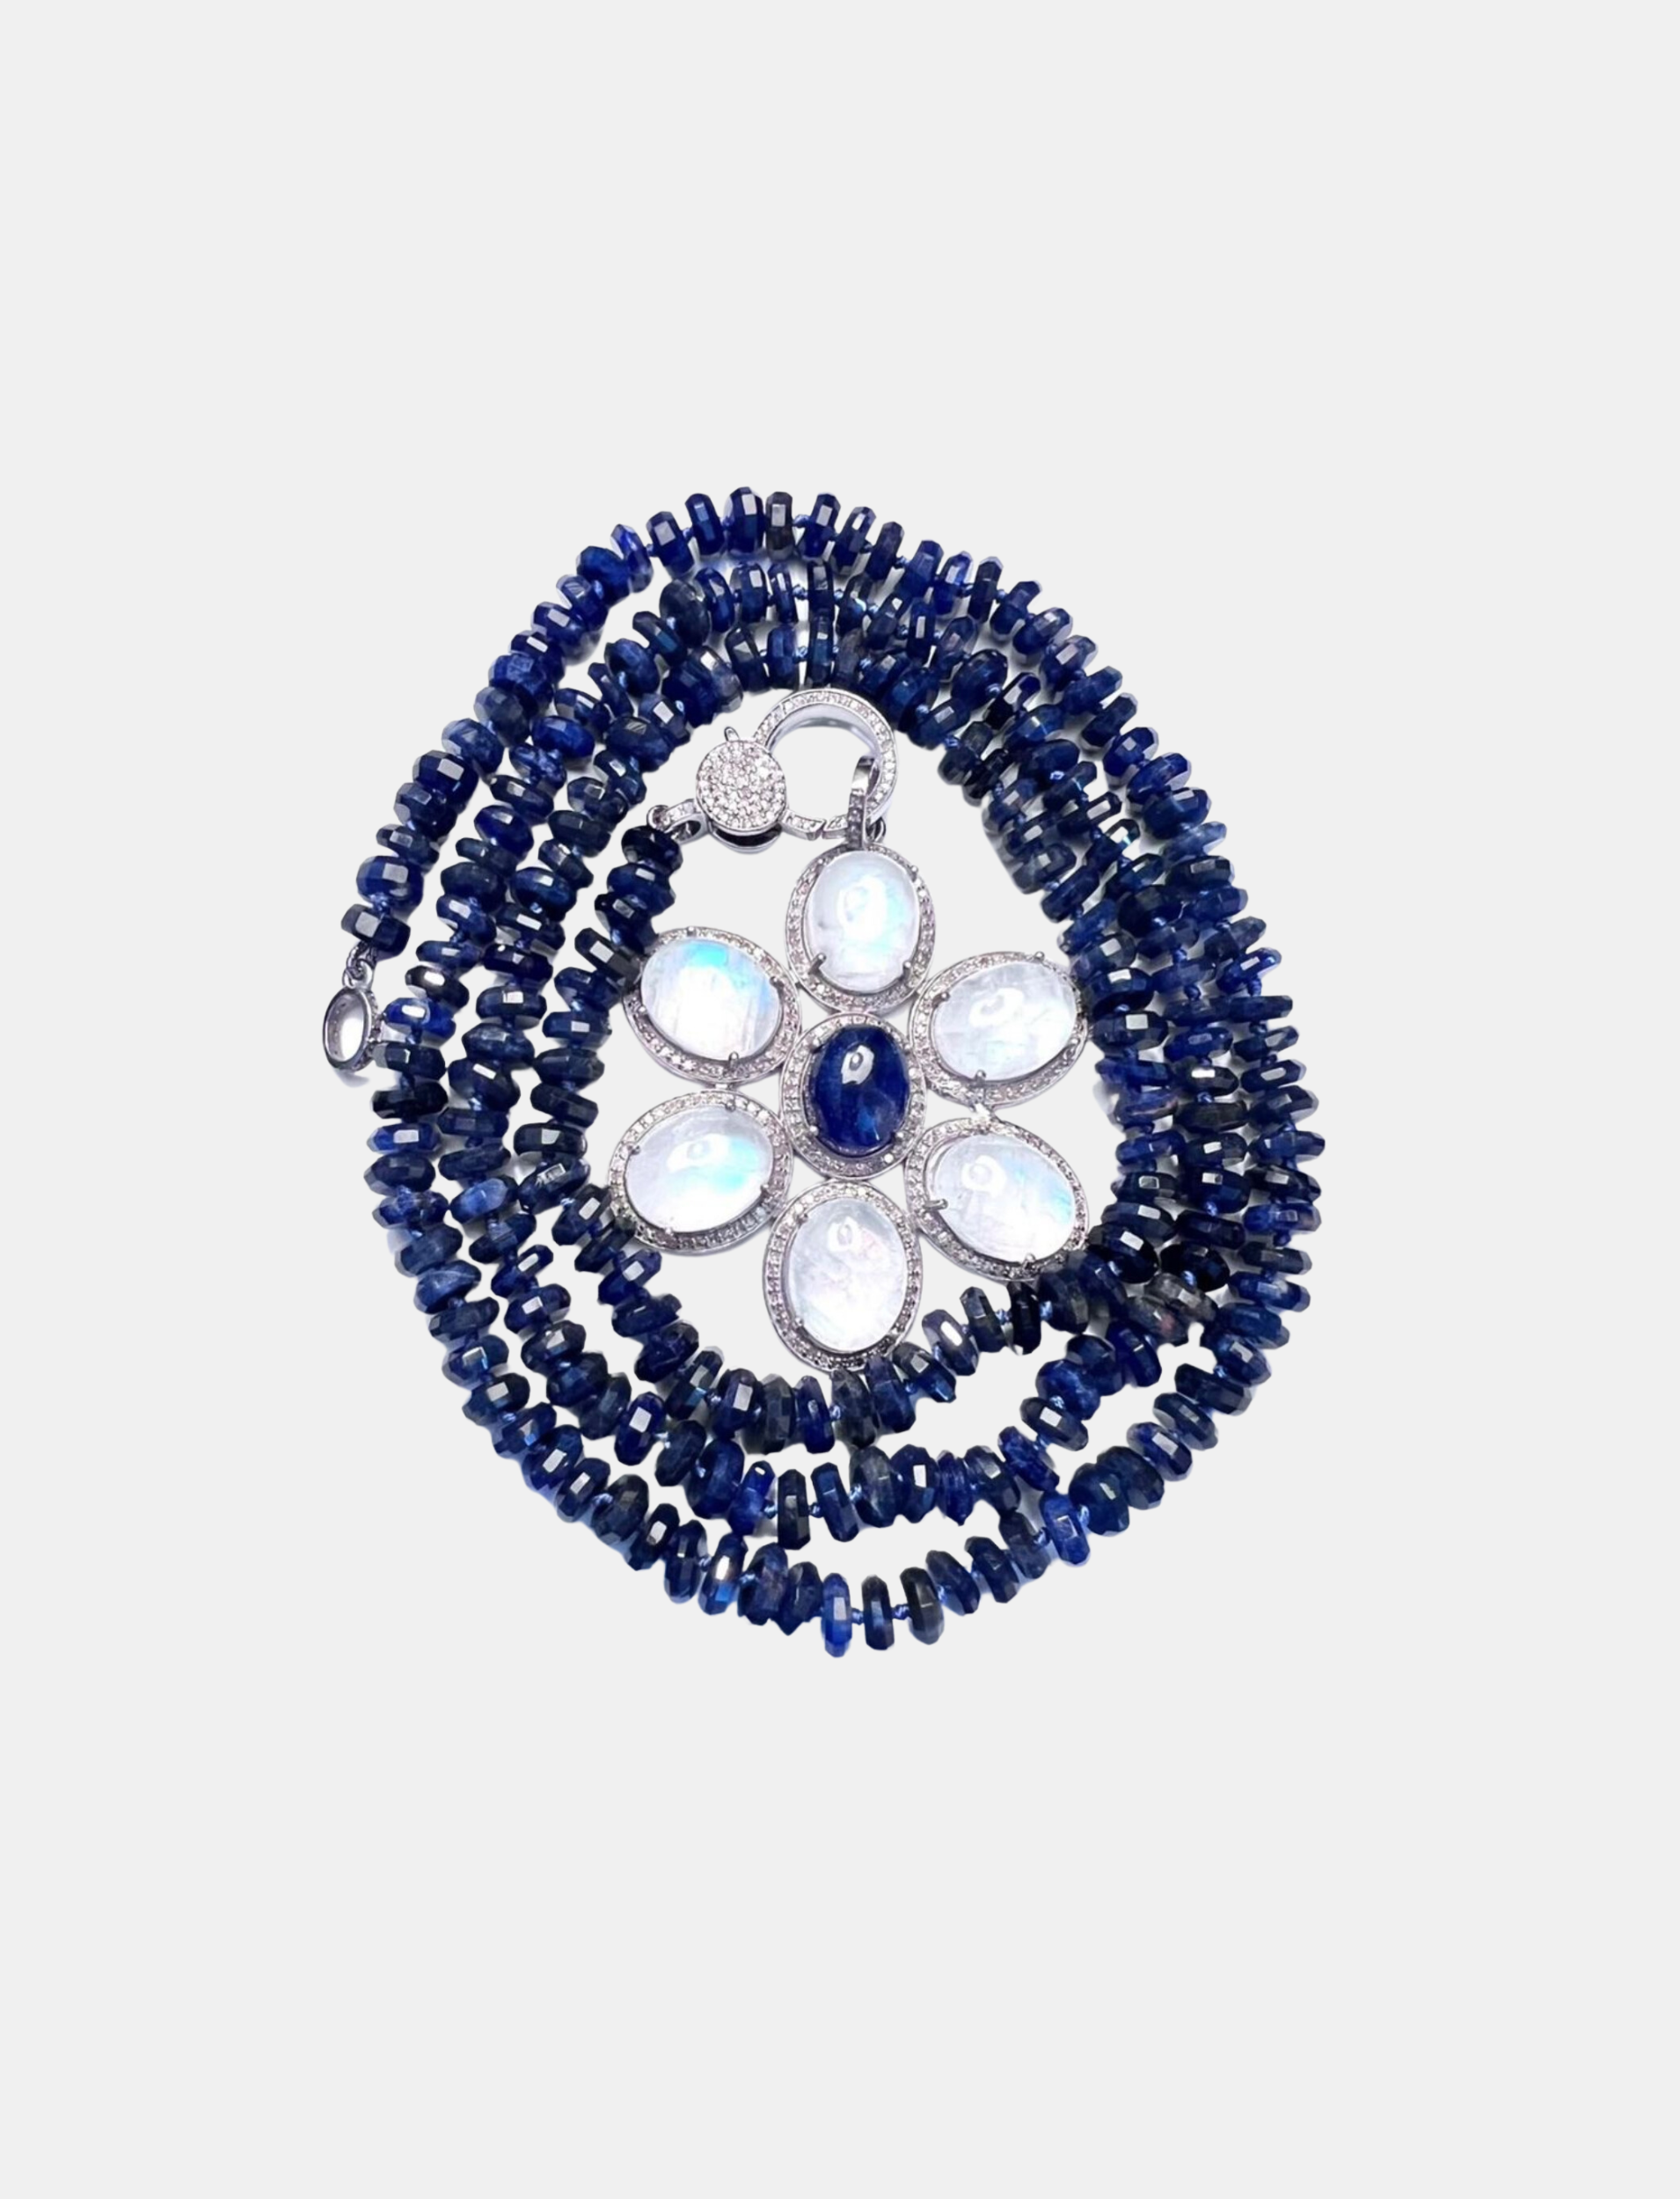 Sodalite Knotted Necklace with Sapphire & Moonstone Flower